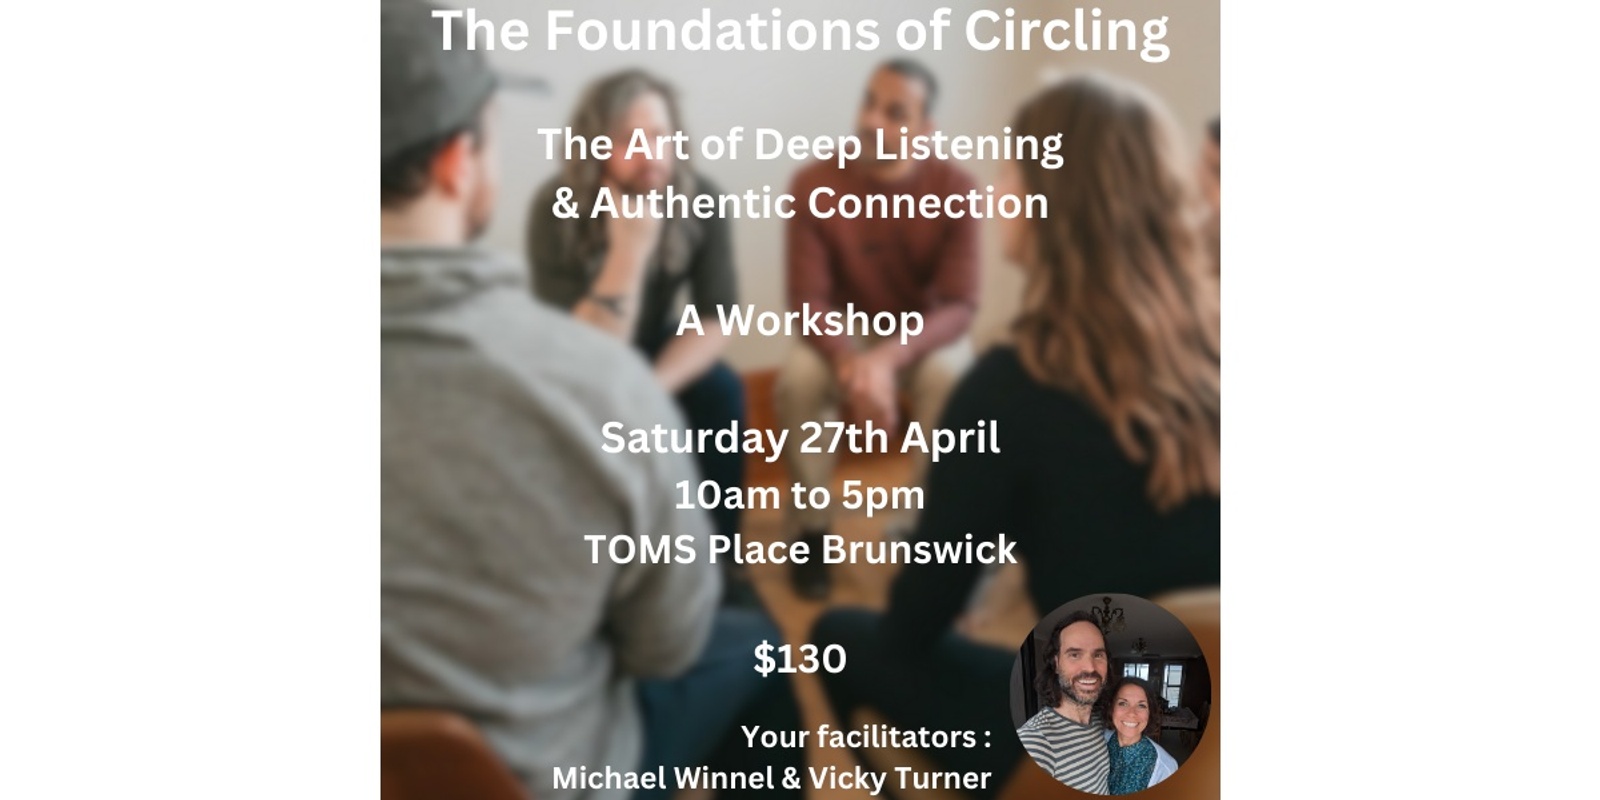 Banner image for Foundations of Circling Workshop - The Art of Deep Listening & Authentic Connection - Brunswick, Melbourne